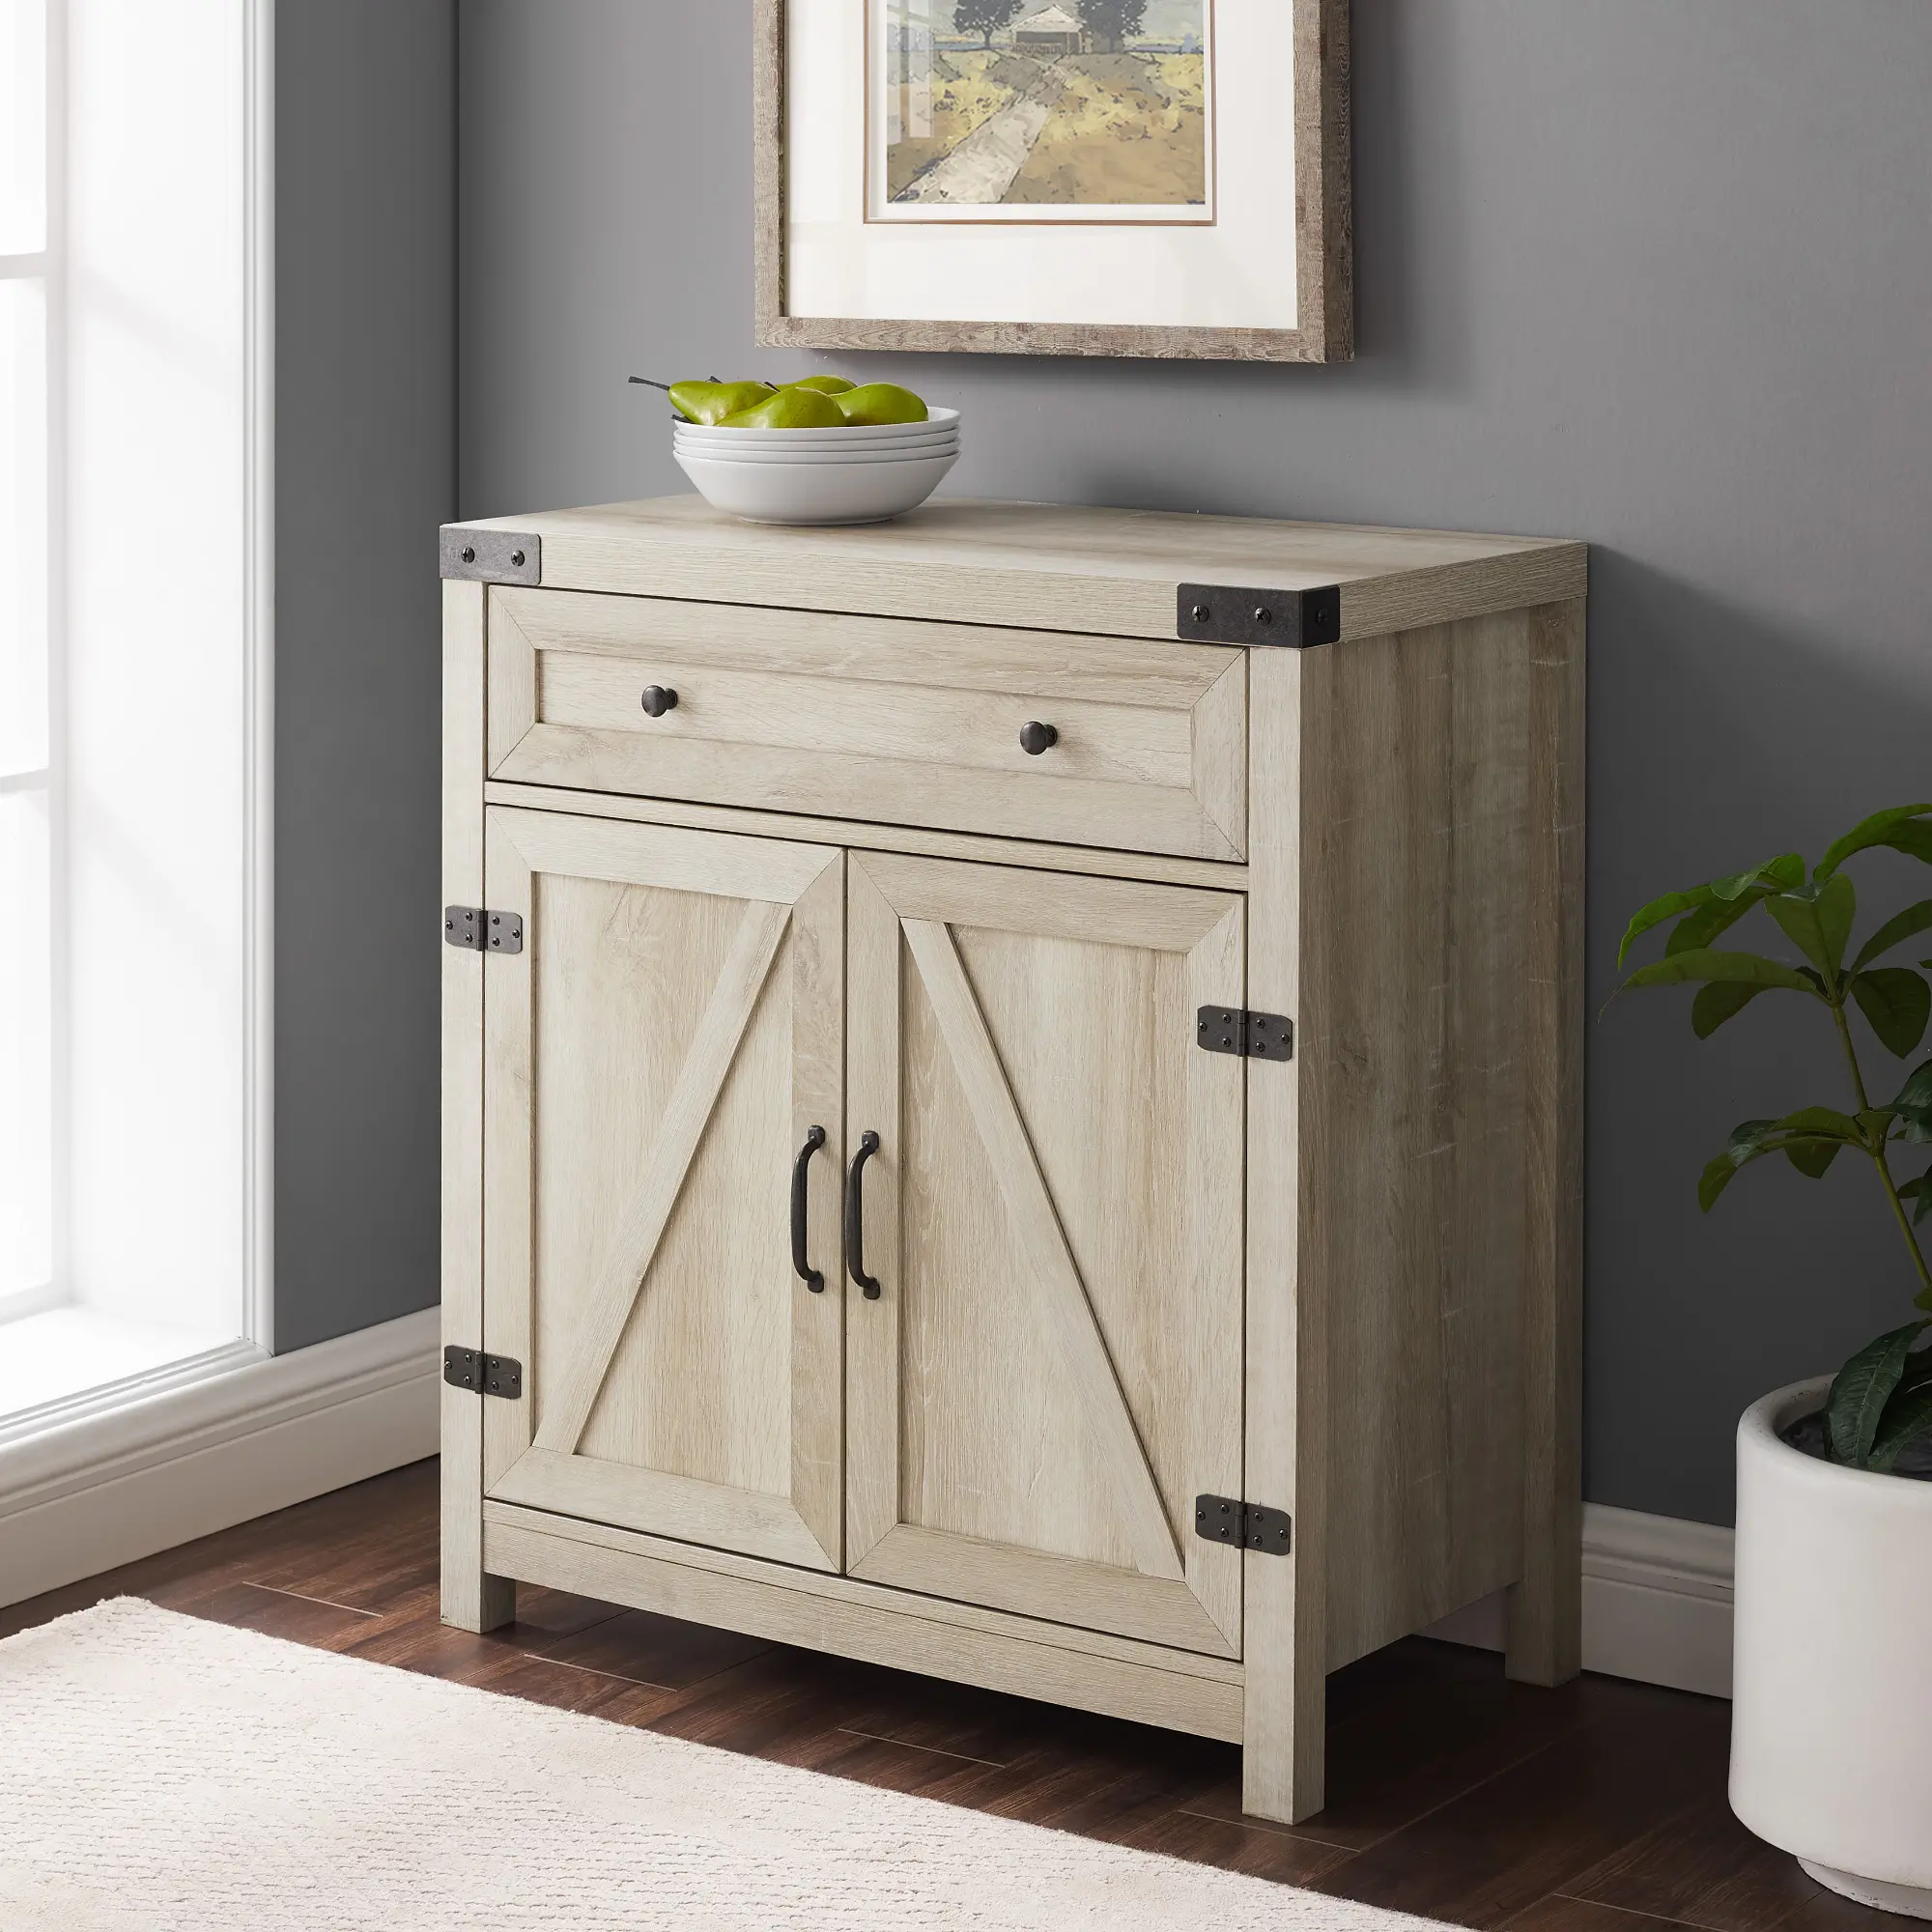 https://static.rcwilley.com/products/111991927/Towne-White-Oak-Farmhouse-Accent-Cabinet---Walker-Edison-rcwilley-image1.webp